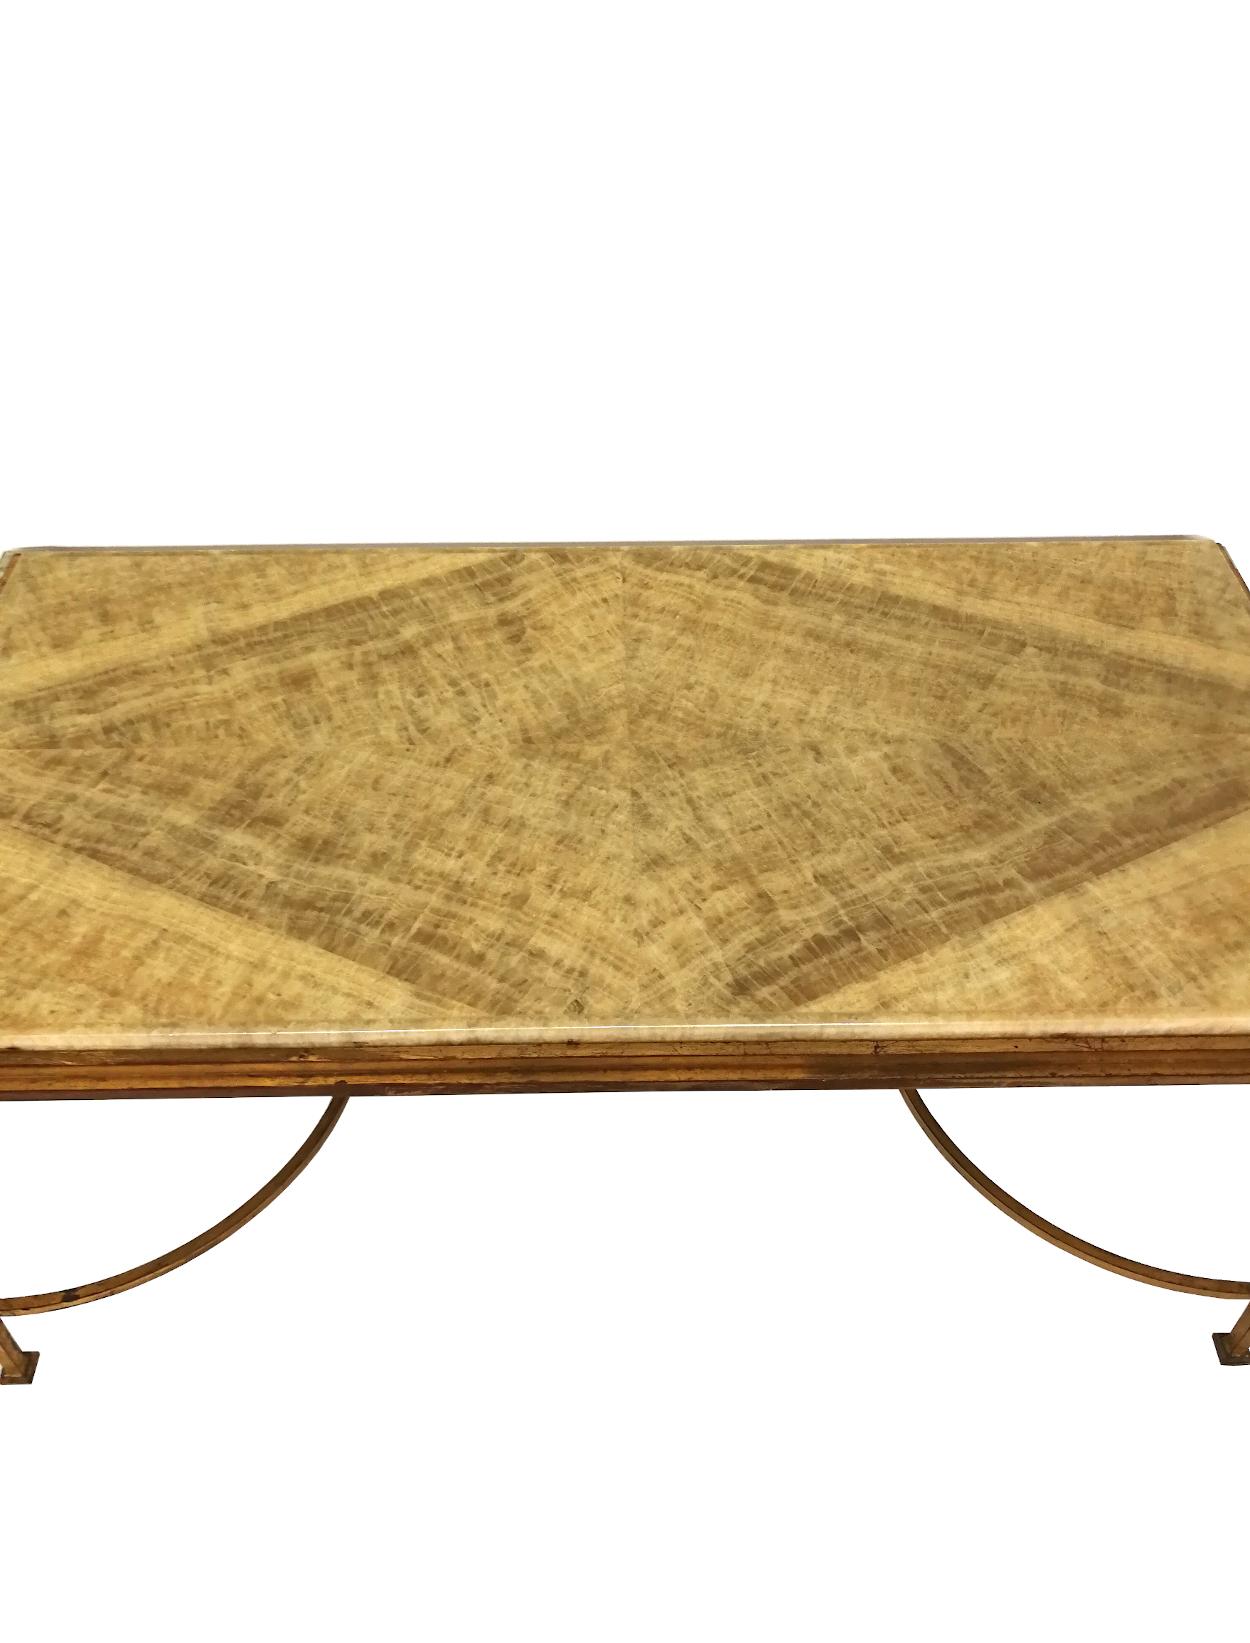 French Gilden Coffee Table Maison Ramsay circa 1950-1960 For Sale